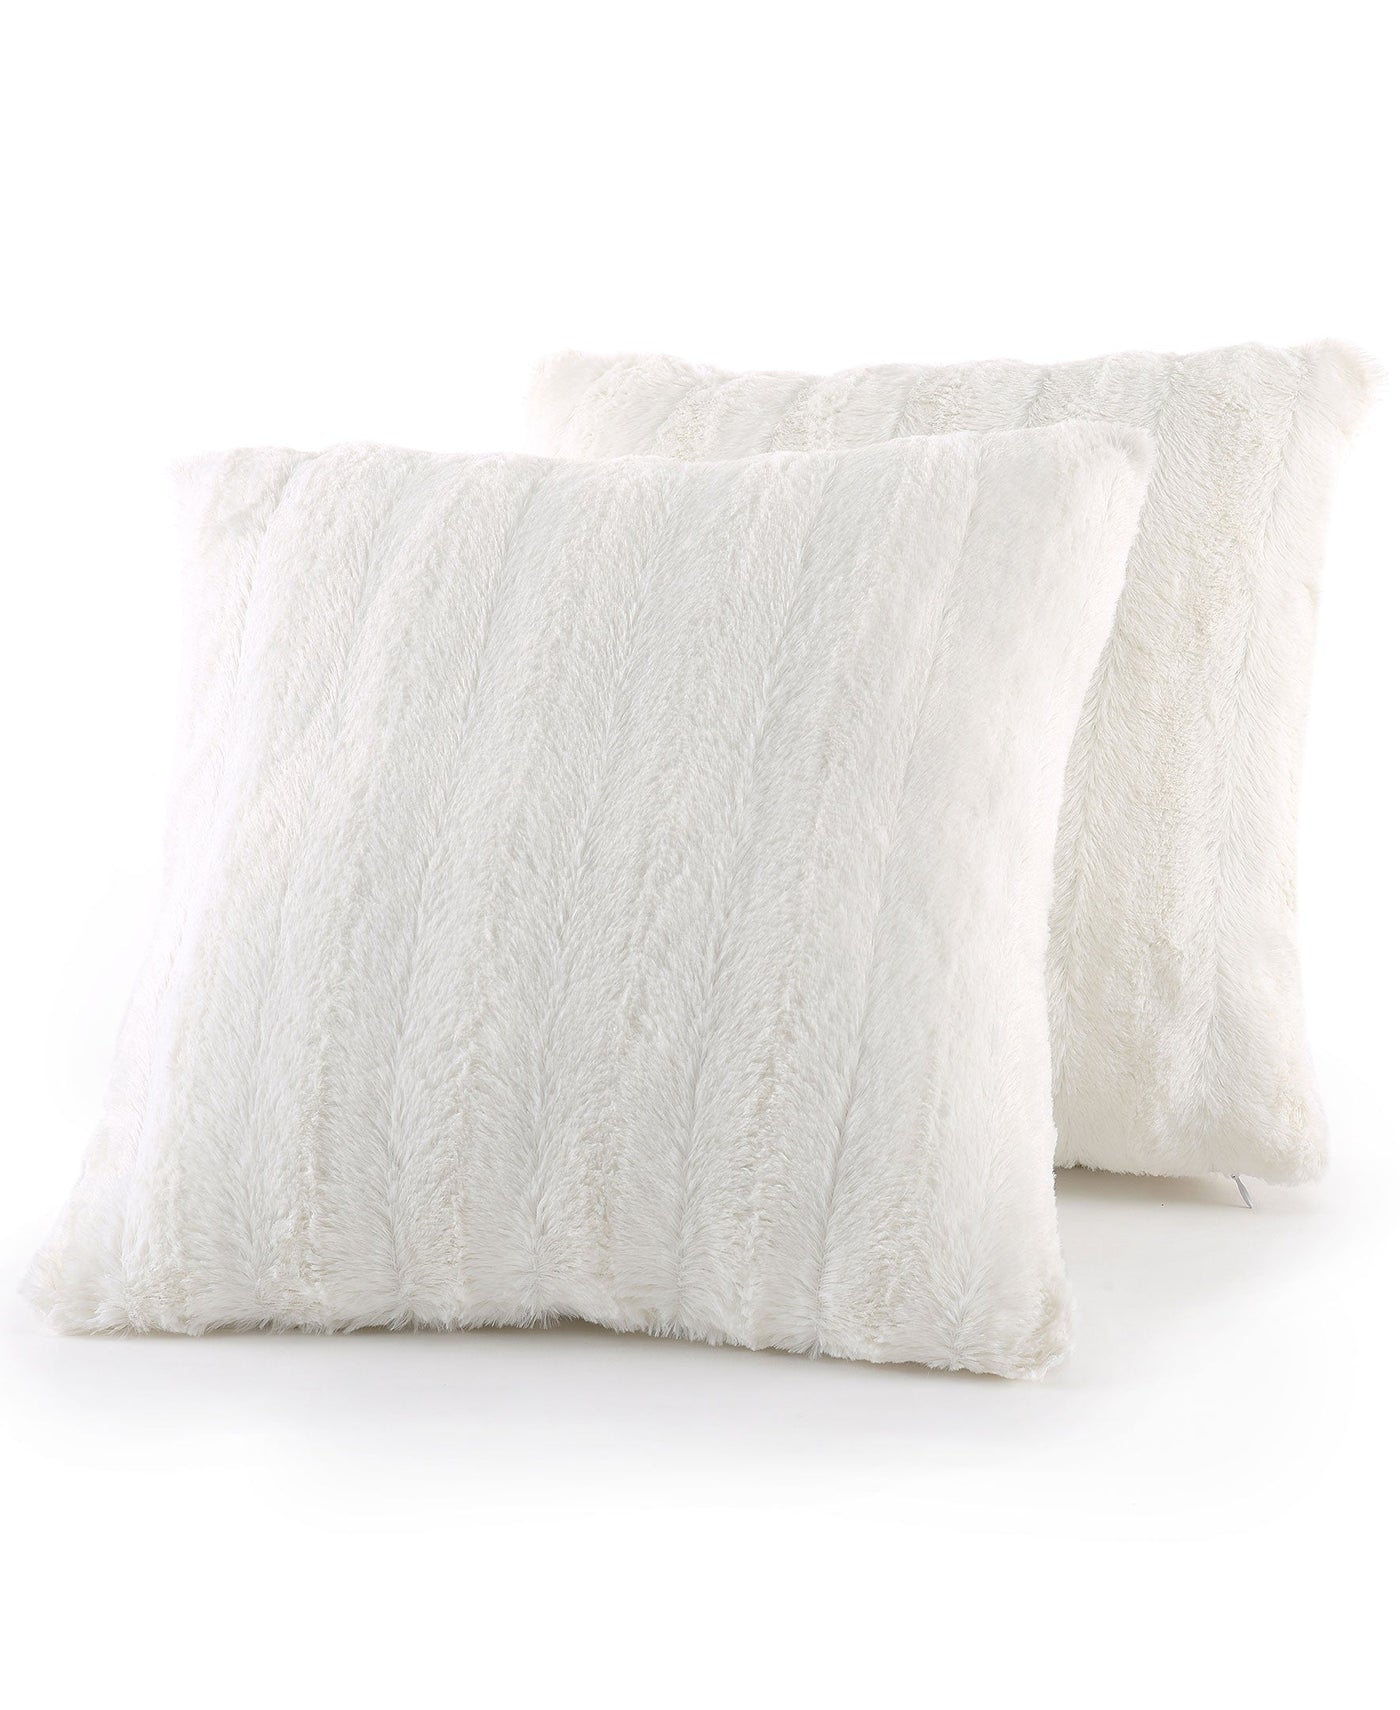 Cheer Collection Faux Fur Throw Pillows - Set of 2 Decorative Couch Pillows  - 26 x 26 - Cheer Collection